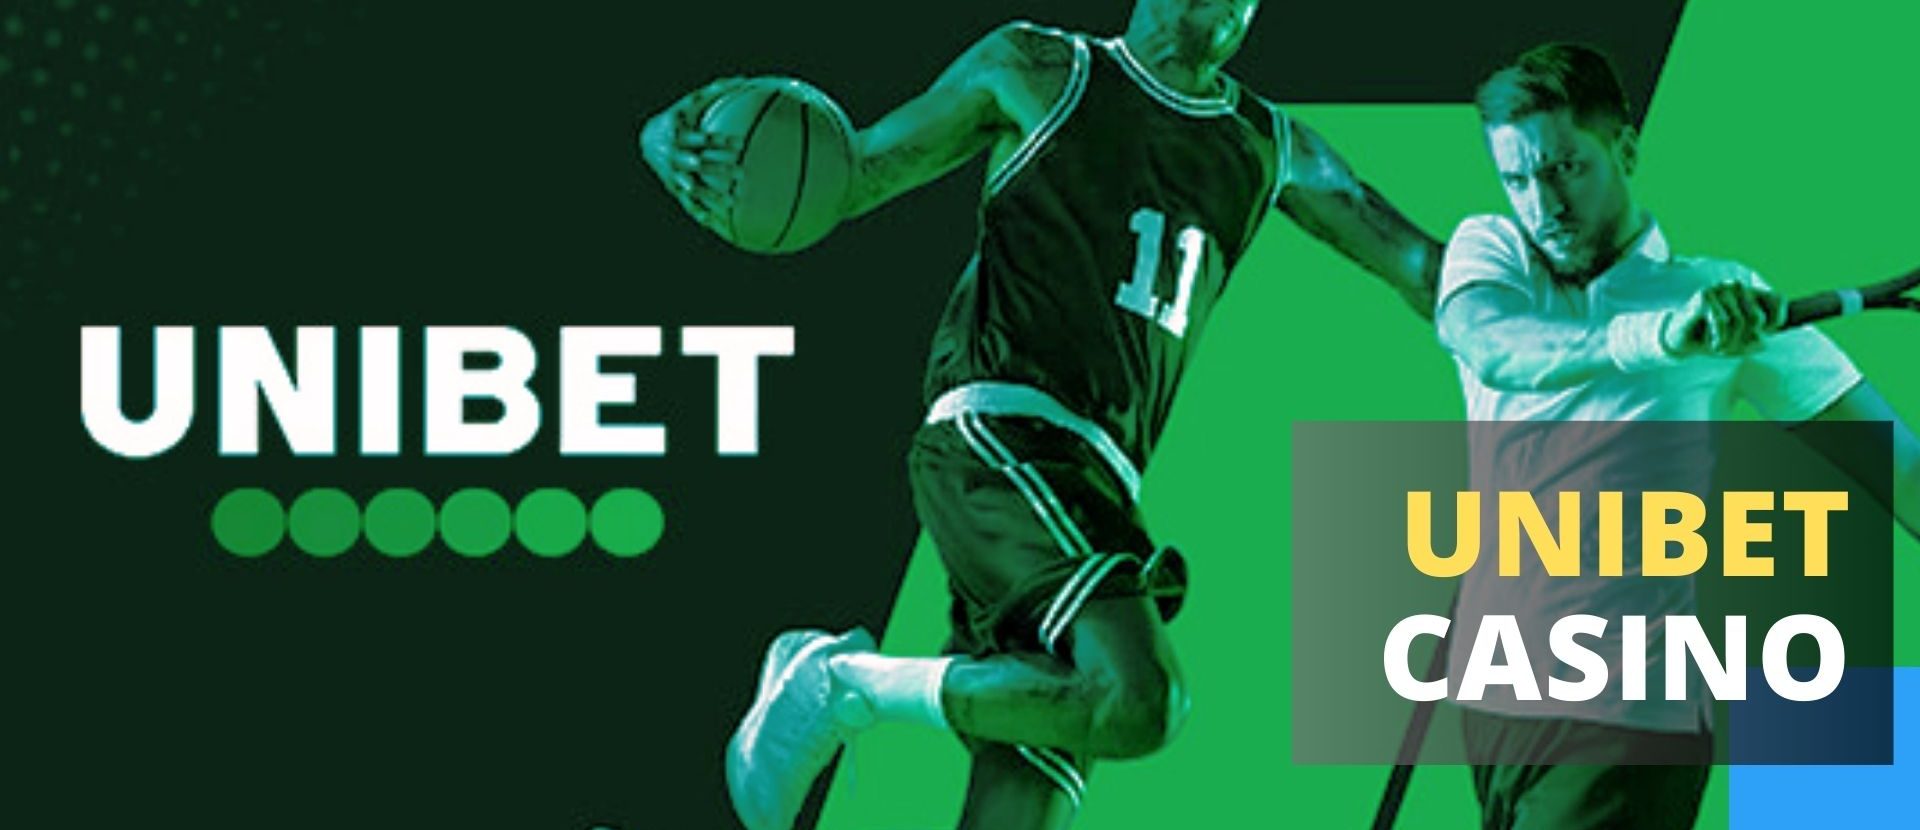 UniBet is a gaming platform that caters to both casino enthusiasts and sportsbook fans